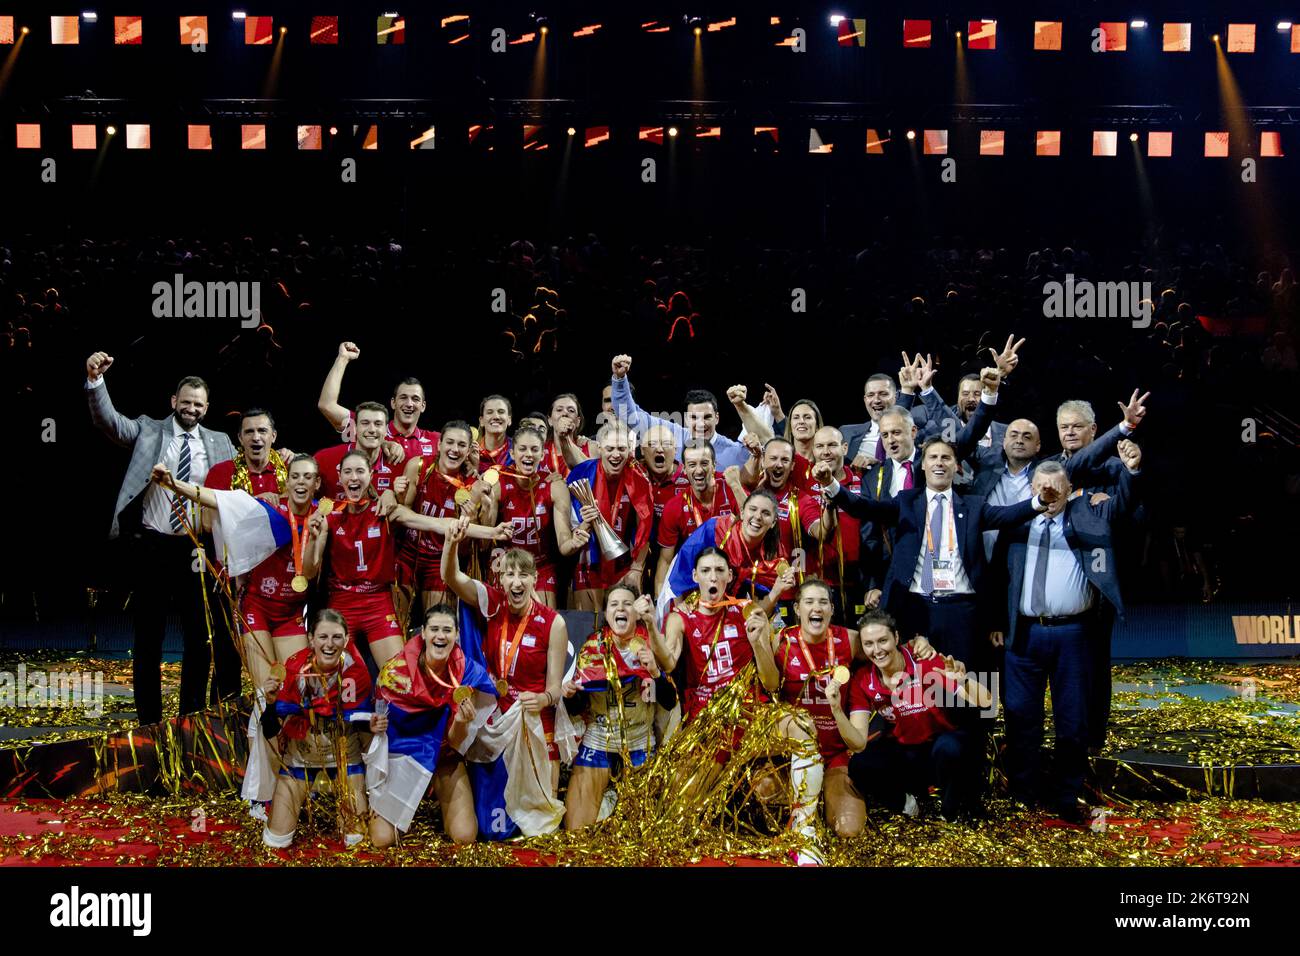 APELDOORN - Serbia wins the final of the Volleyball World Cup in Omnisport Apeldoorn. They won the last game against Brazil. ANP SANDER KING Stock Photo